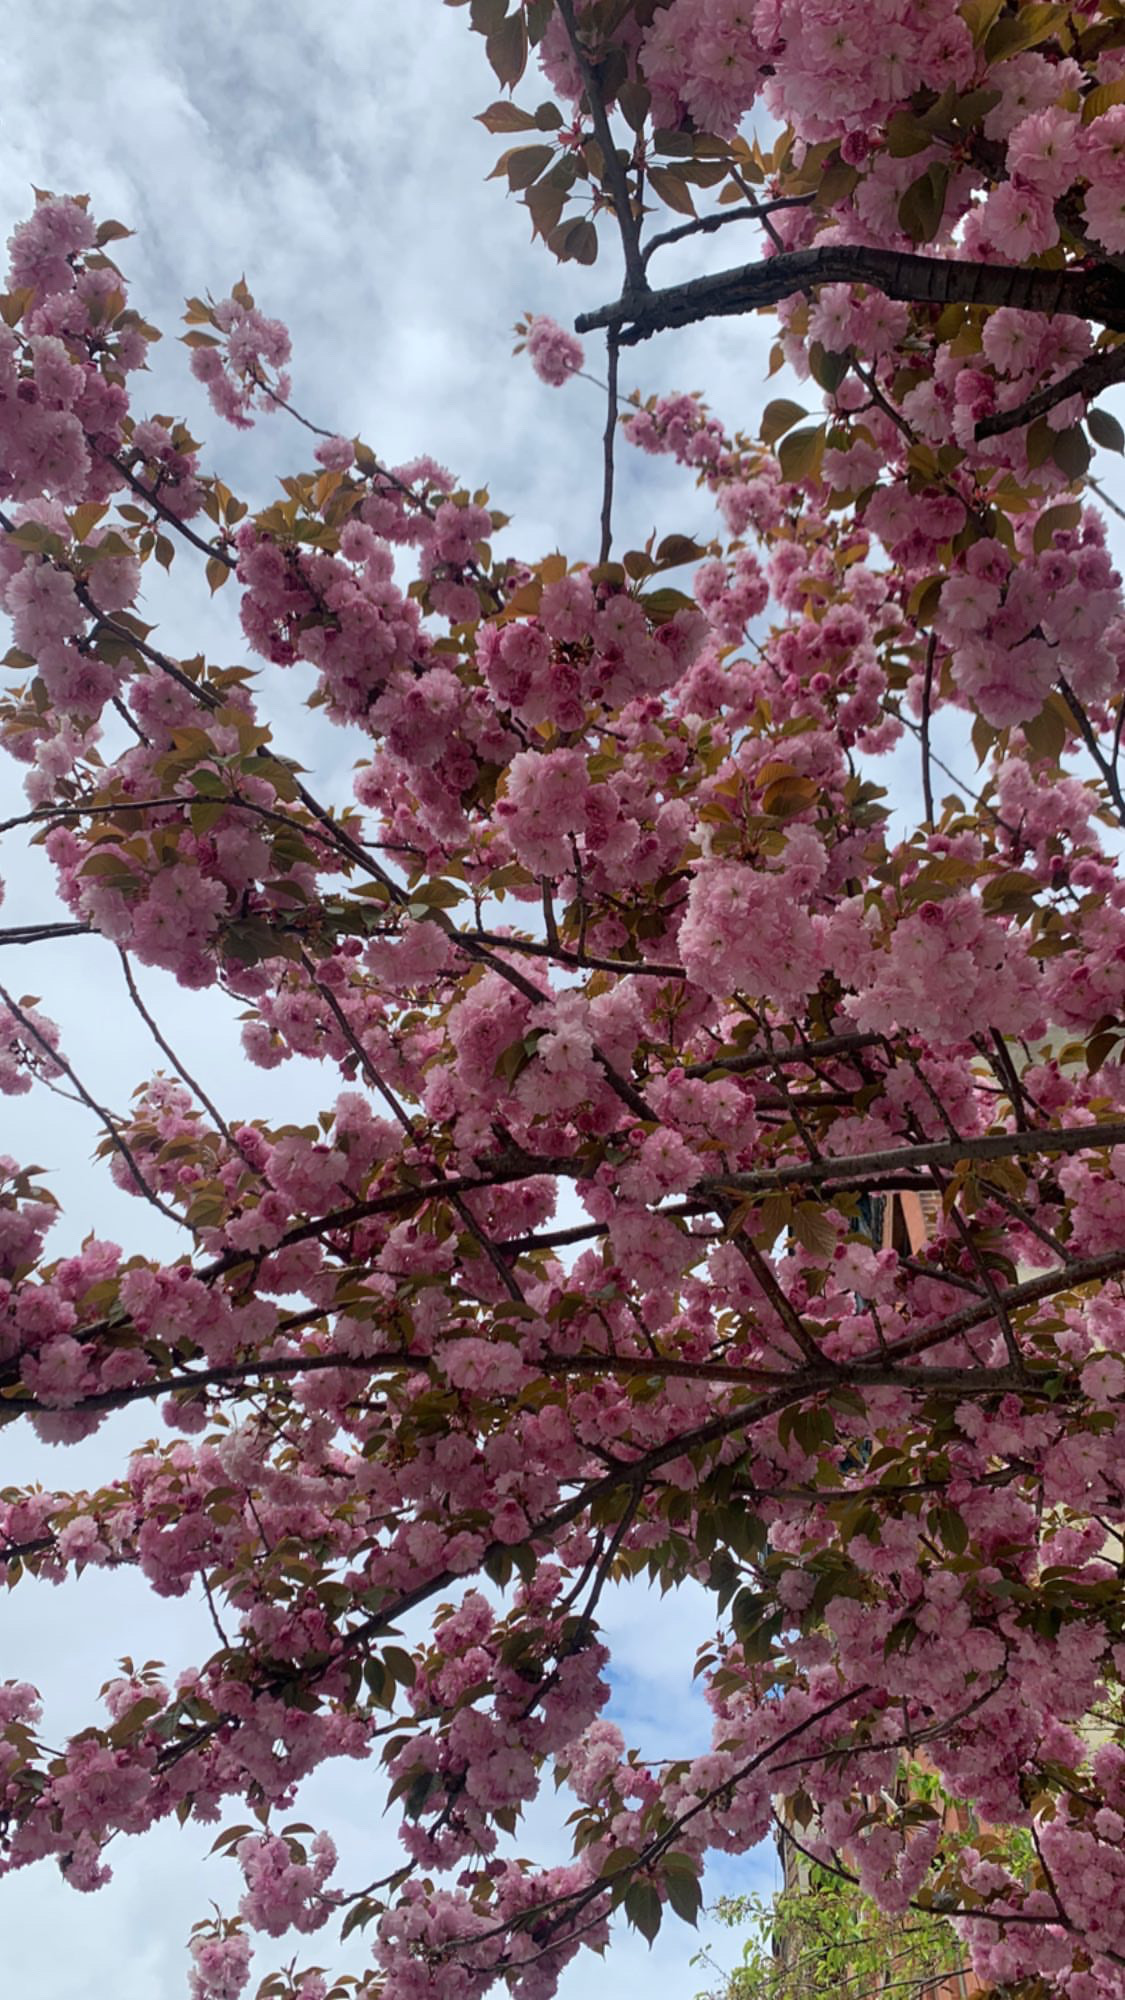 Pink flowers blossoming during the spring season in New York City.